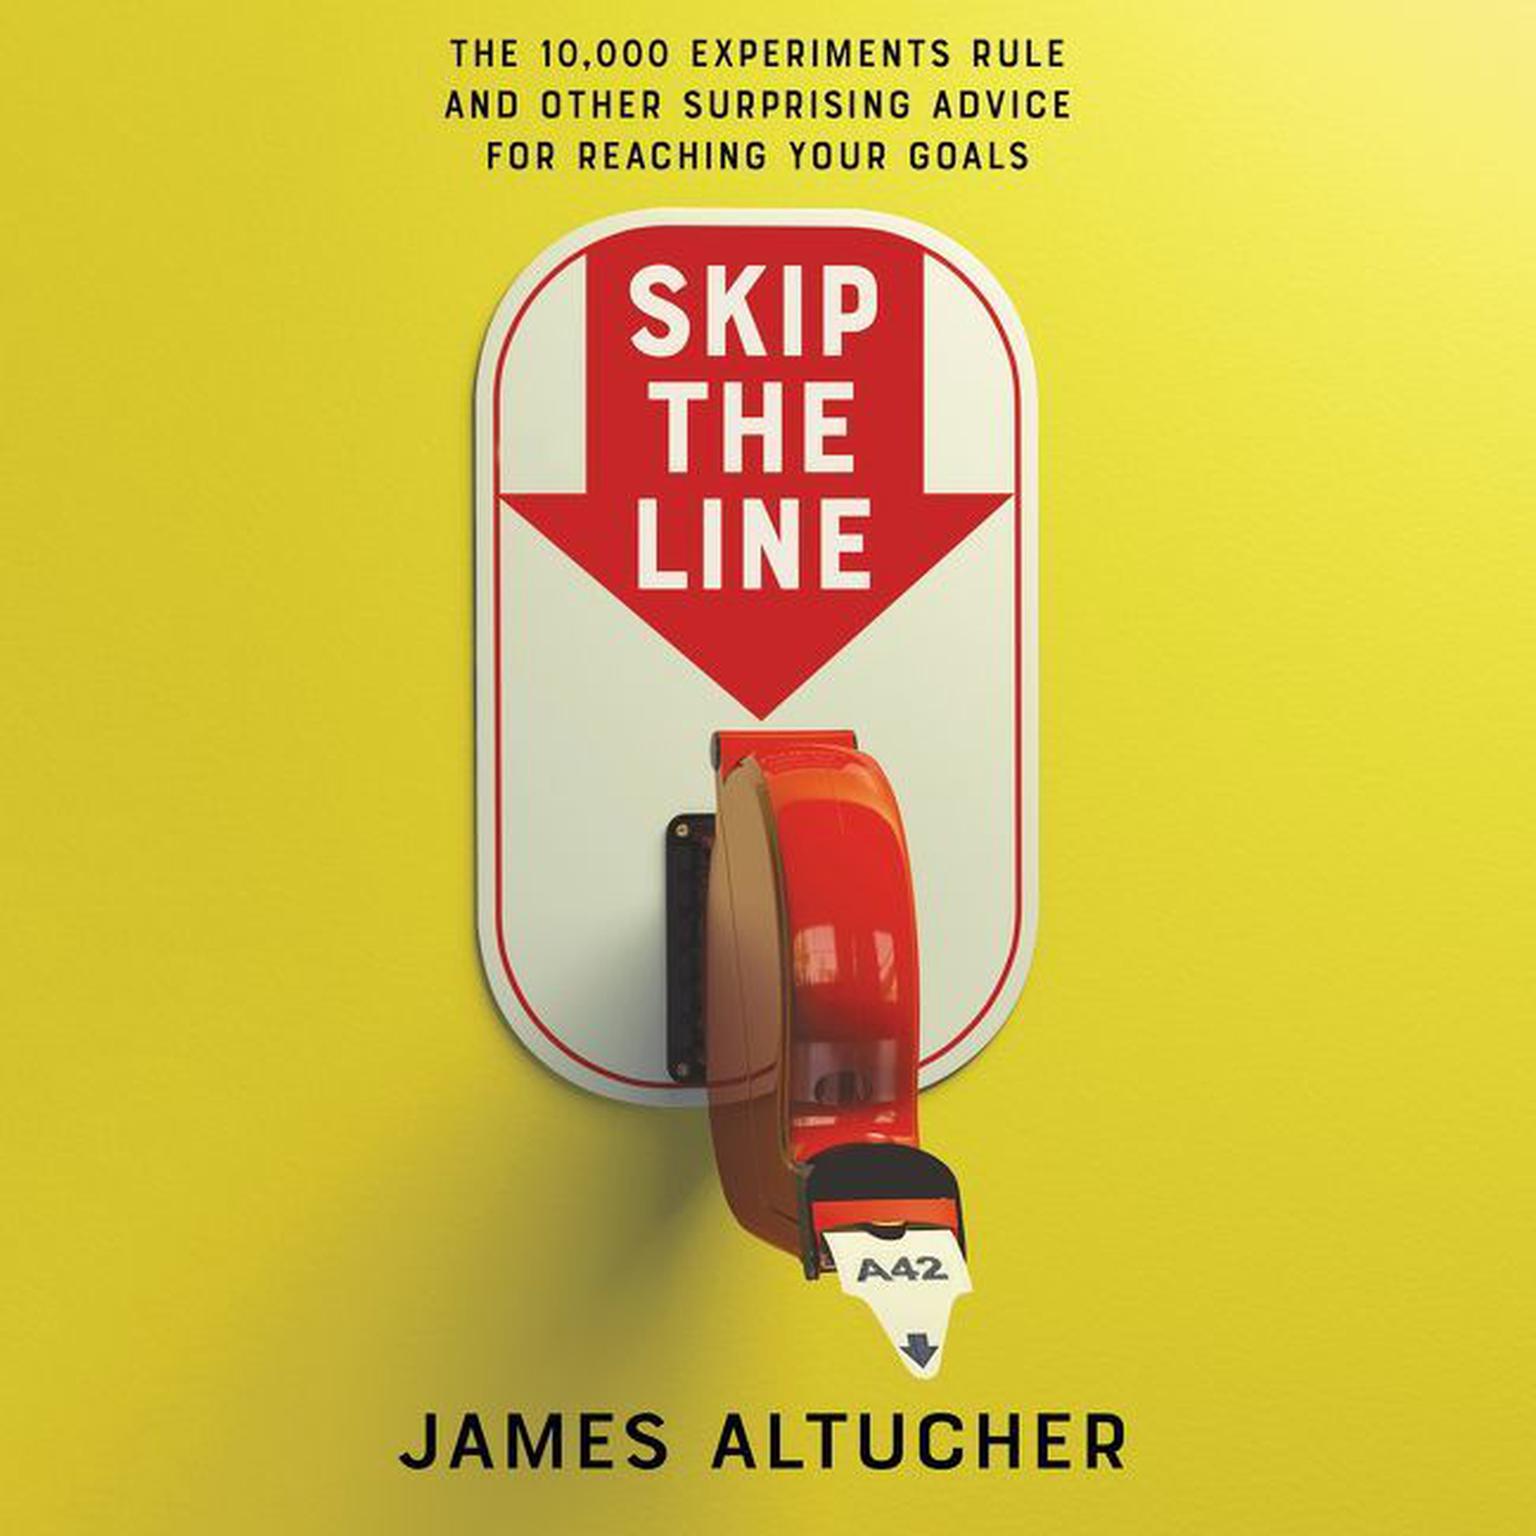 Skip the Line: The 10,000 Experiments Rule and Other Surprising Advice for Reaching Your Goals Audiobook, by James Altucher